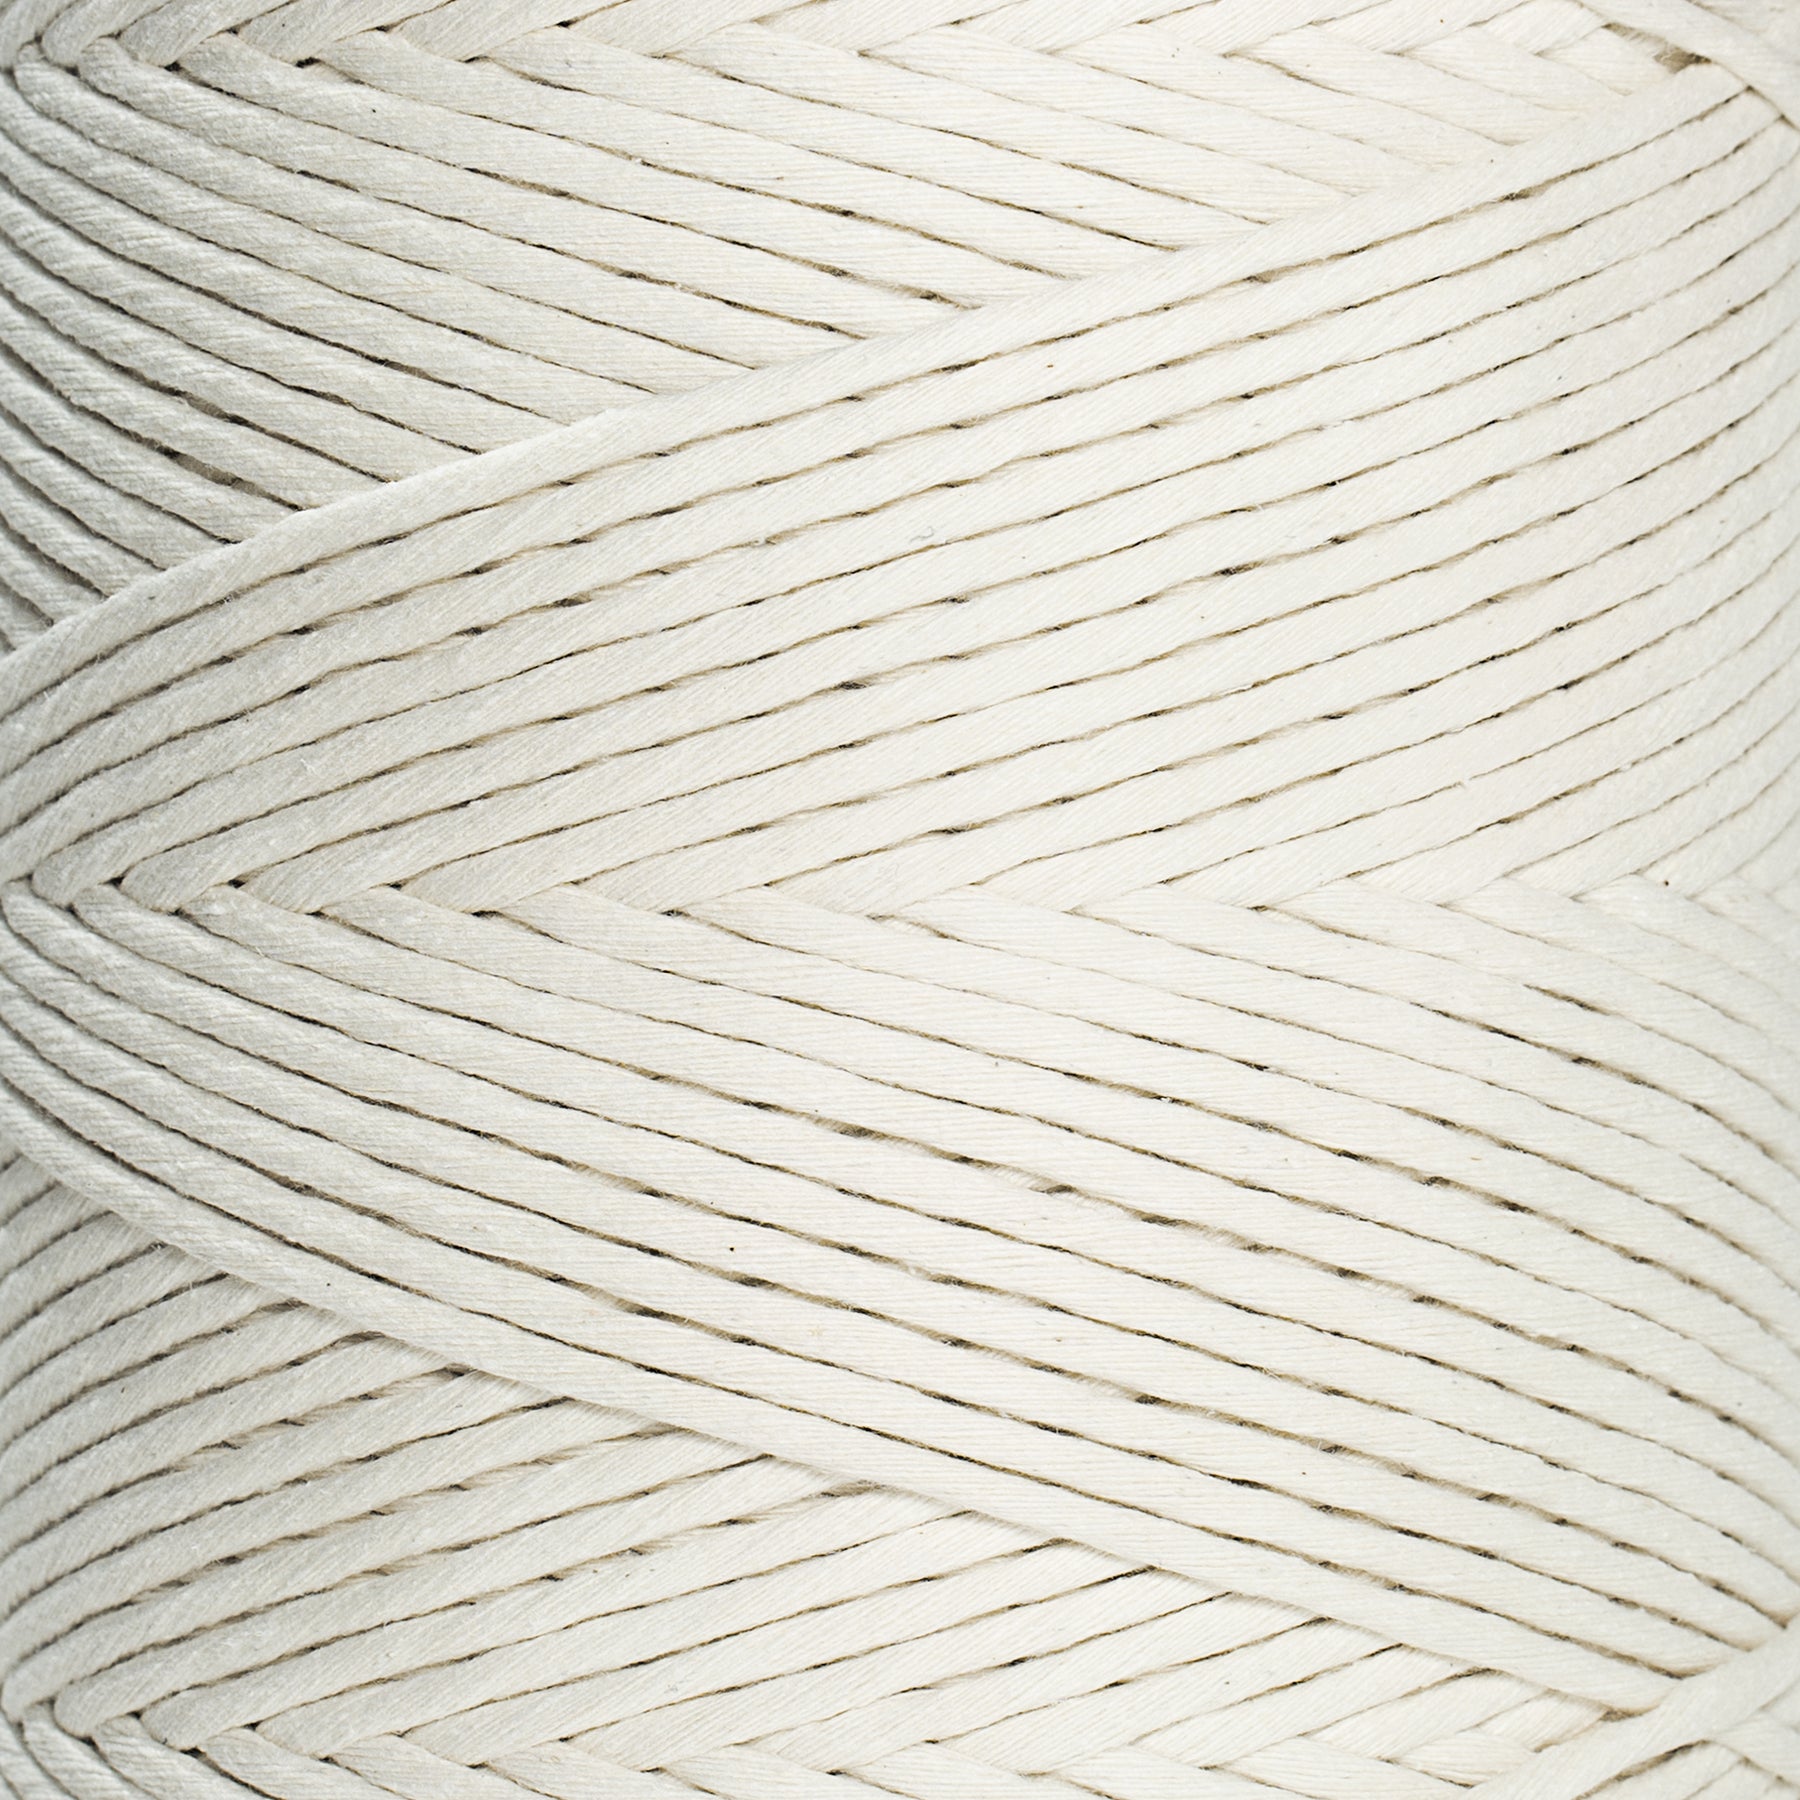 COTTON ROPE ZERO WASTE 4 MM - 3 PLY - NATURAL COLOR 820 ft – GANXXET